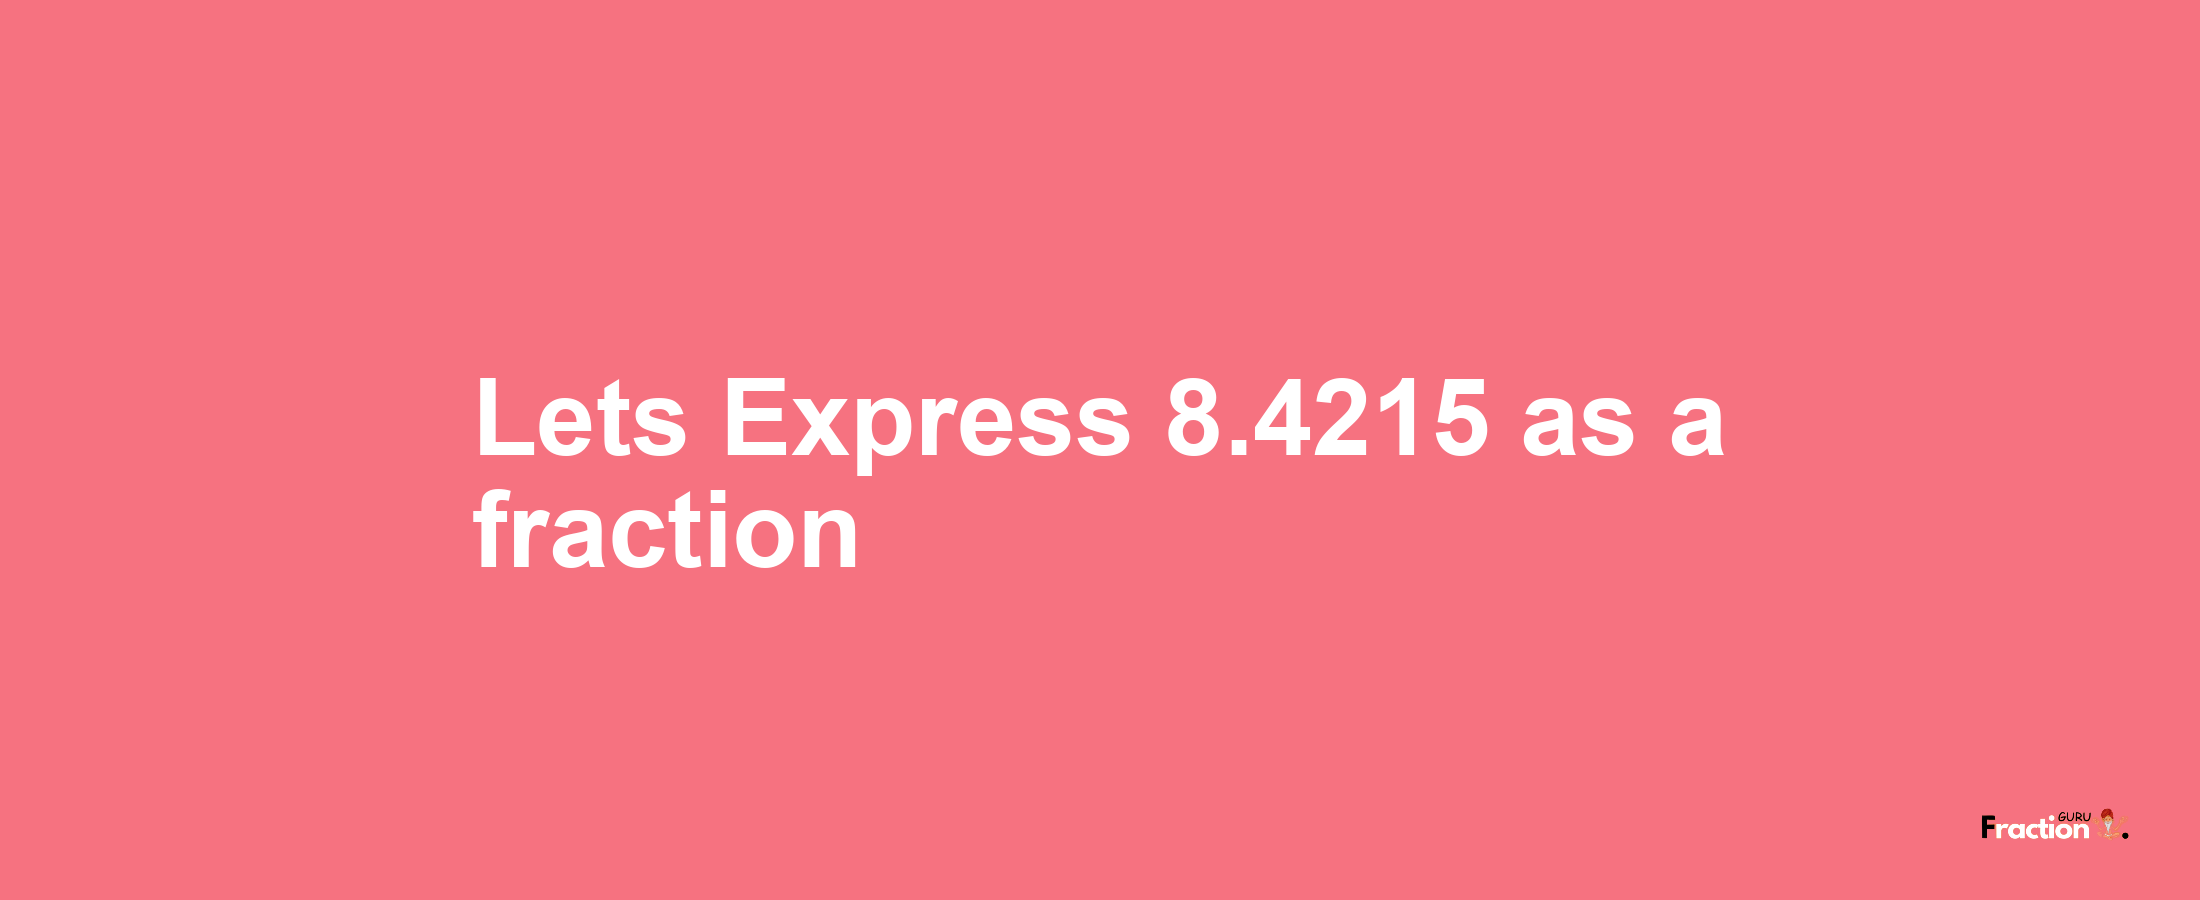 Lets Express 8.4215 as afraction